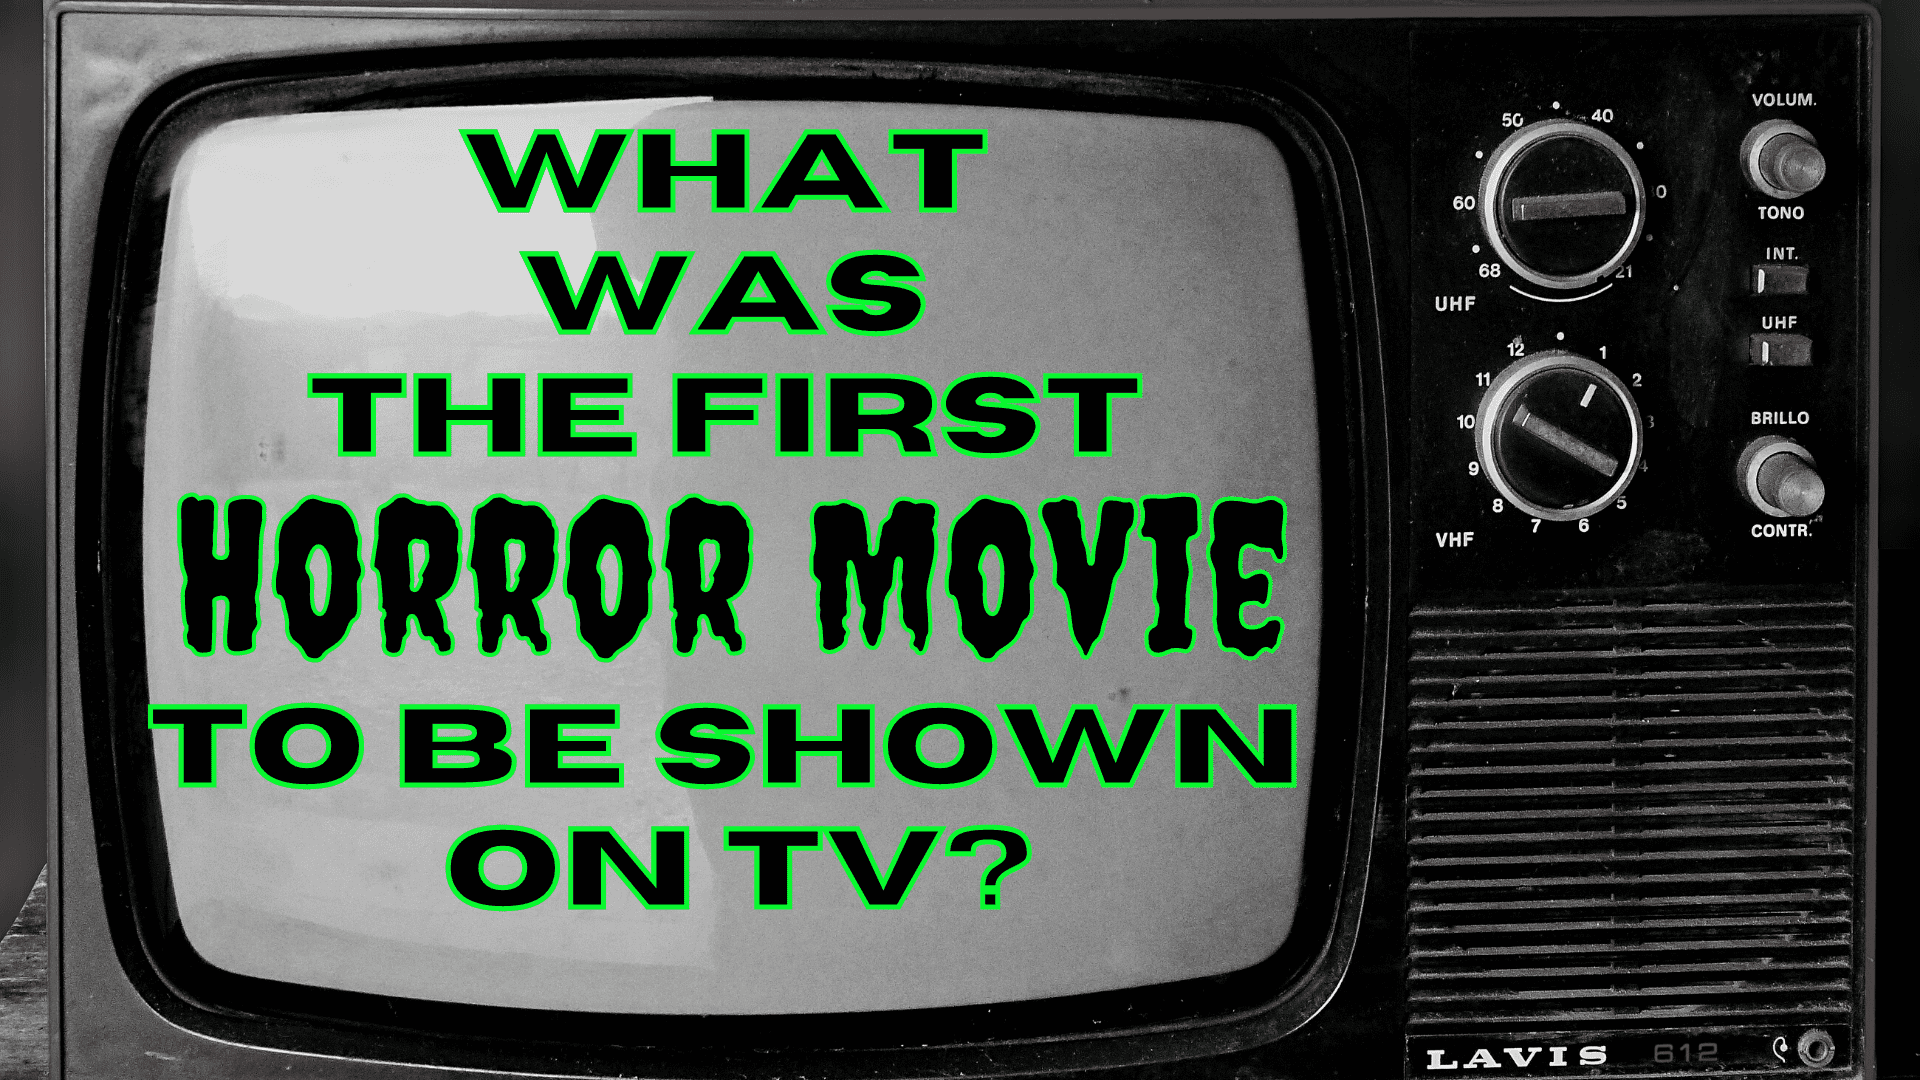 First Horror Movie to be Shown On TV?